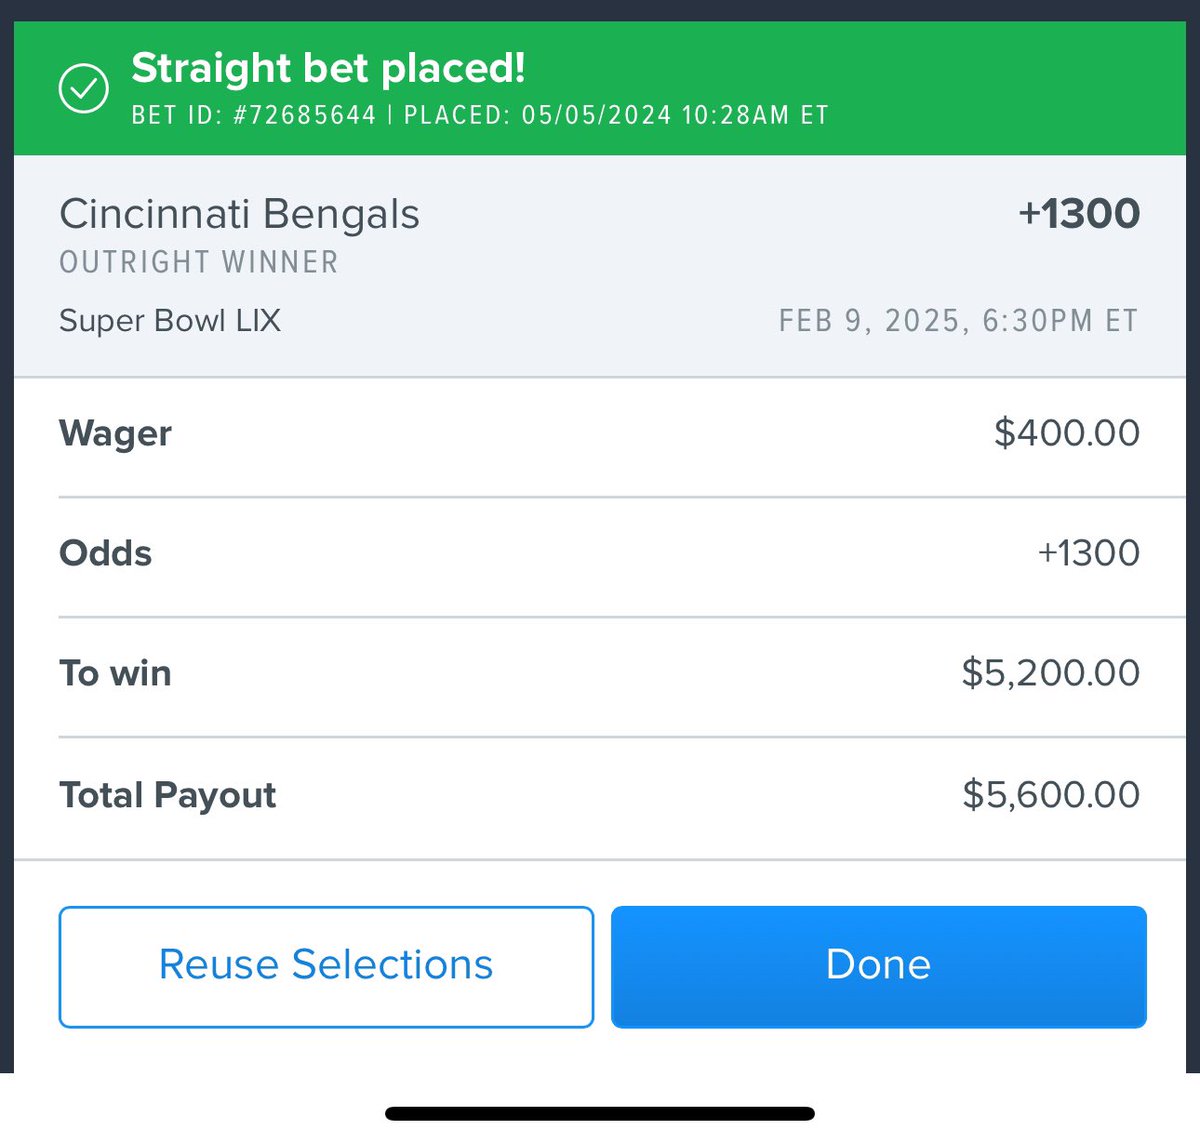 Future bet! #whodey #bengals #rulethejungle @bengals